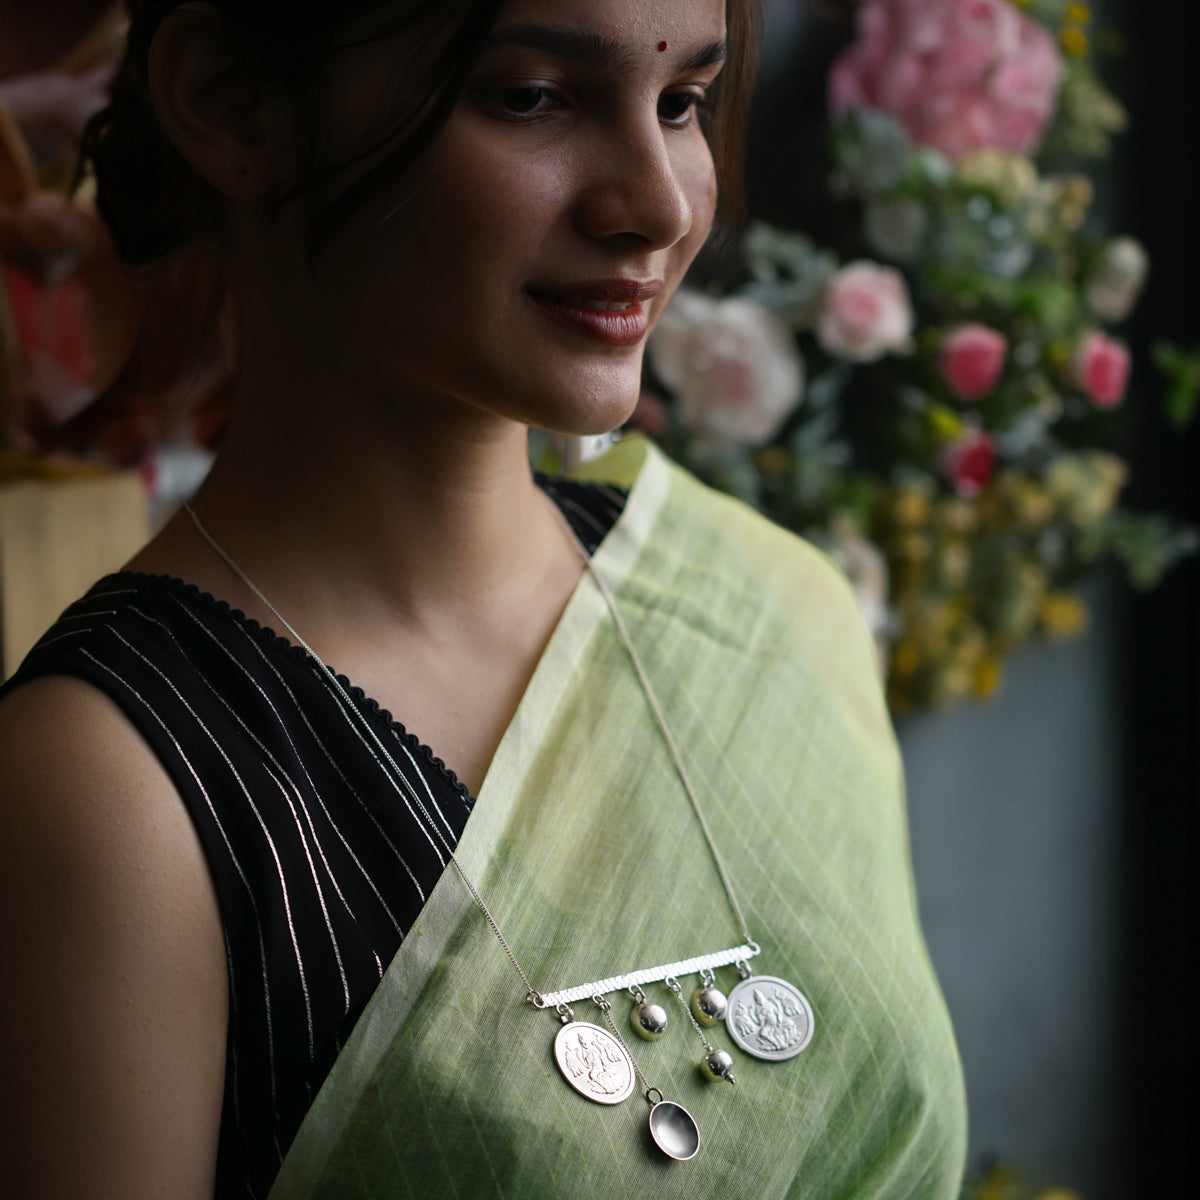 a woman wearing a green sari and a necklace